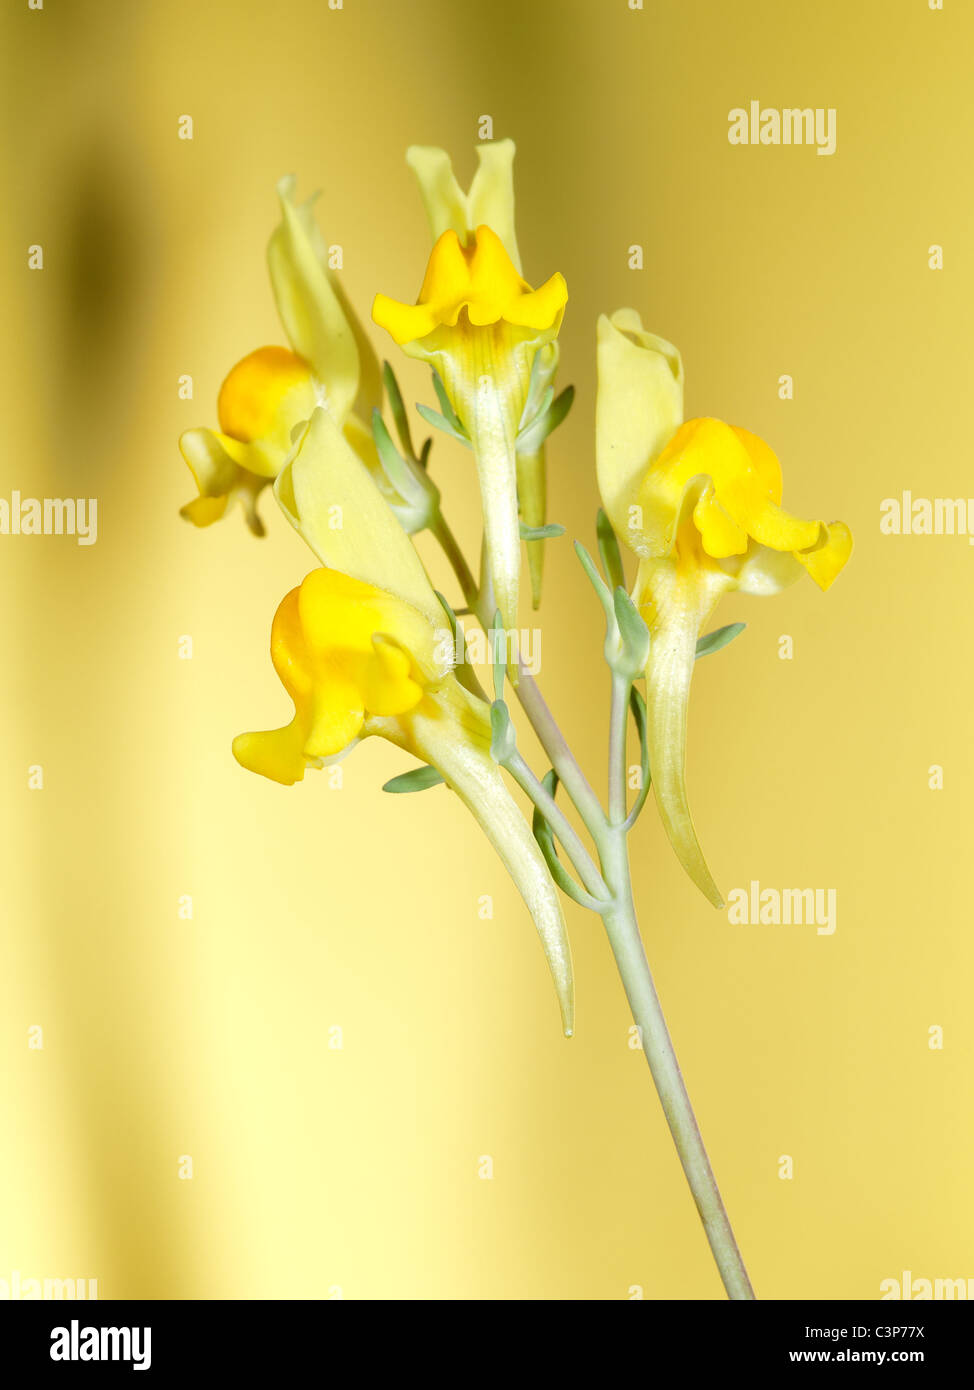 Snapdragon, Linaria propinqua, toadflax vertical portrait of flowers with nice out of focus background. Stock Photo